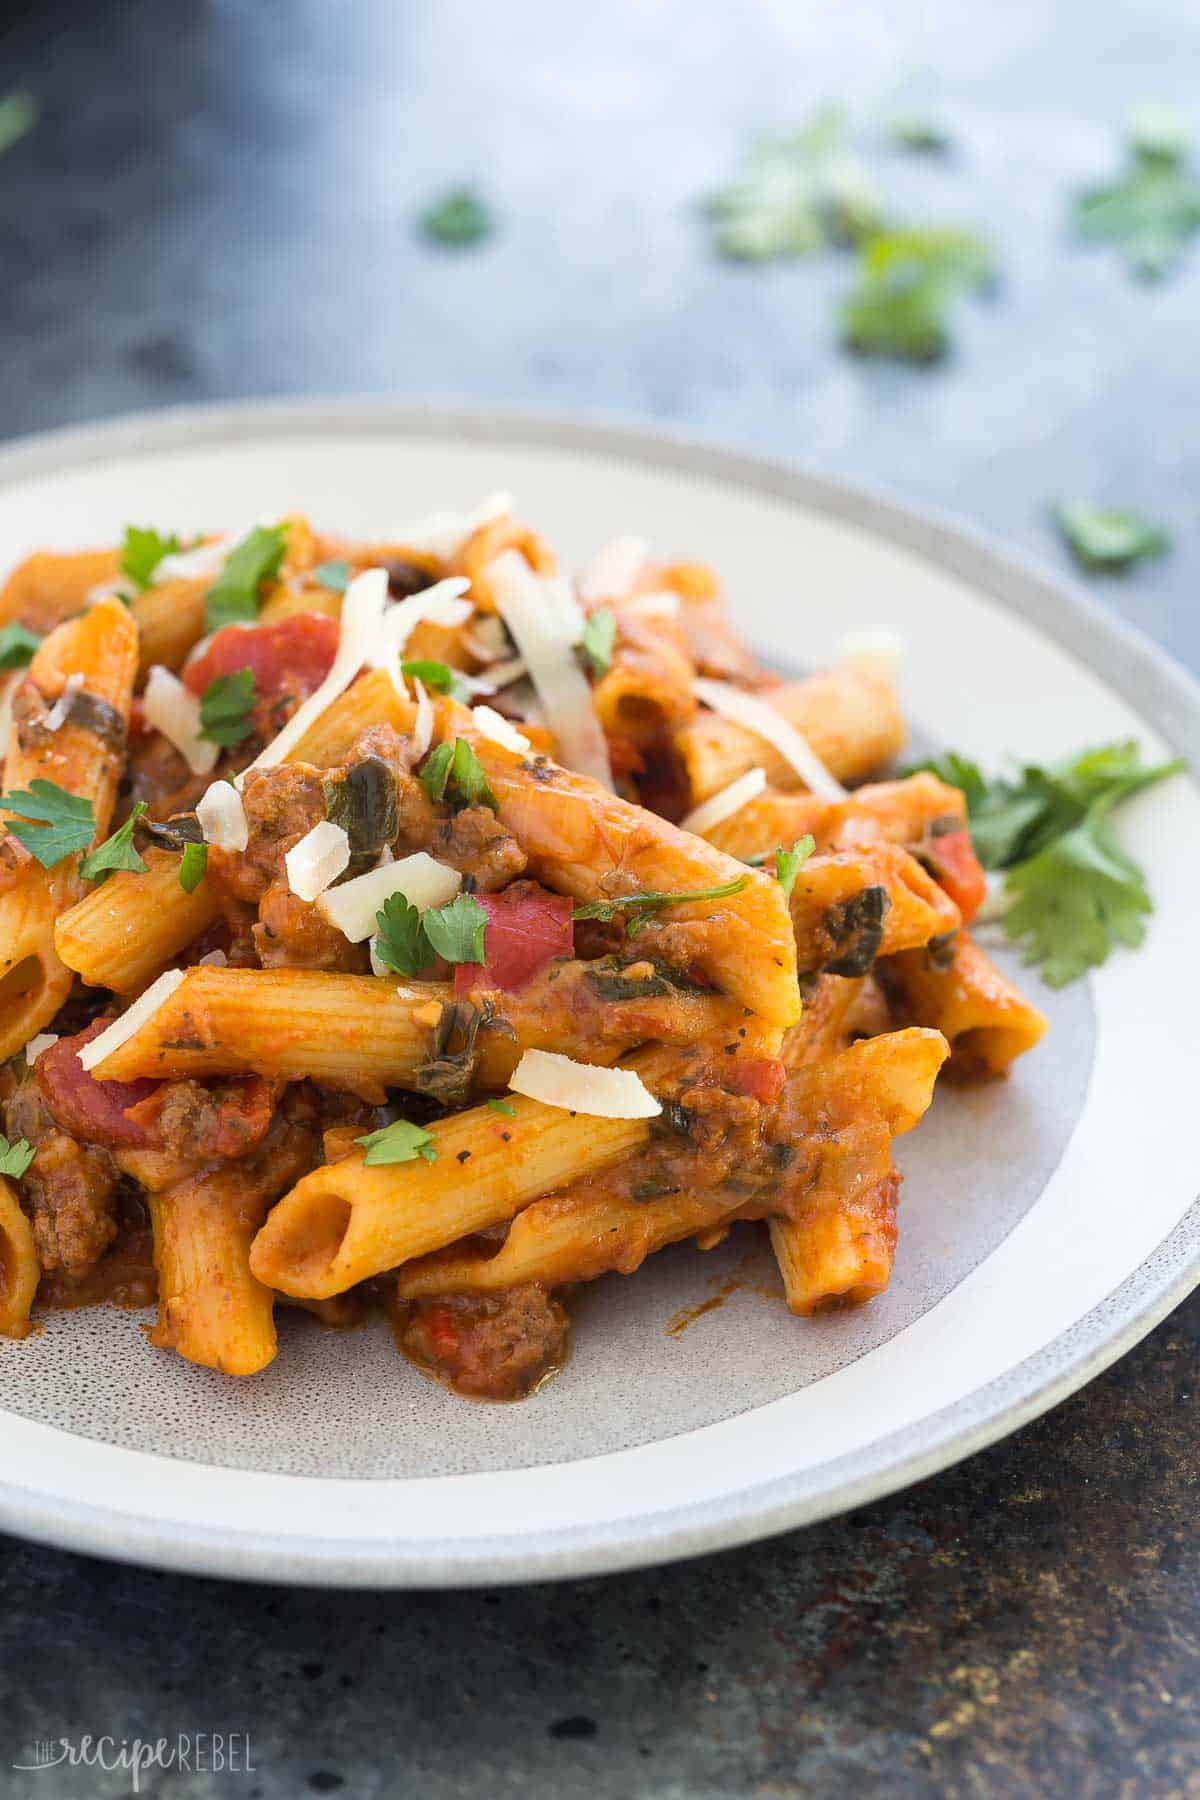 This easy Instant Pot Baked Ziti is a new twist on a classic favorite dish, made healthier with high fibre pasta, sneaky veggies, and extra lean ground beef. It's made completely in the Instant Pot or pressure cooker, so no extra dishes! You can even use frozen ground beef! Includes step by step recipe video. #instantpot #instantpotrecipe #pressurecooker pressure cooker recipe easy dinner #dinner #recipe #cooking #groundbeef easy ground beef recipe #onepot one pot